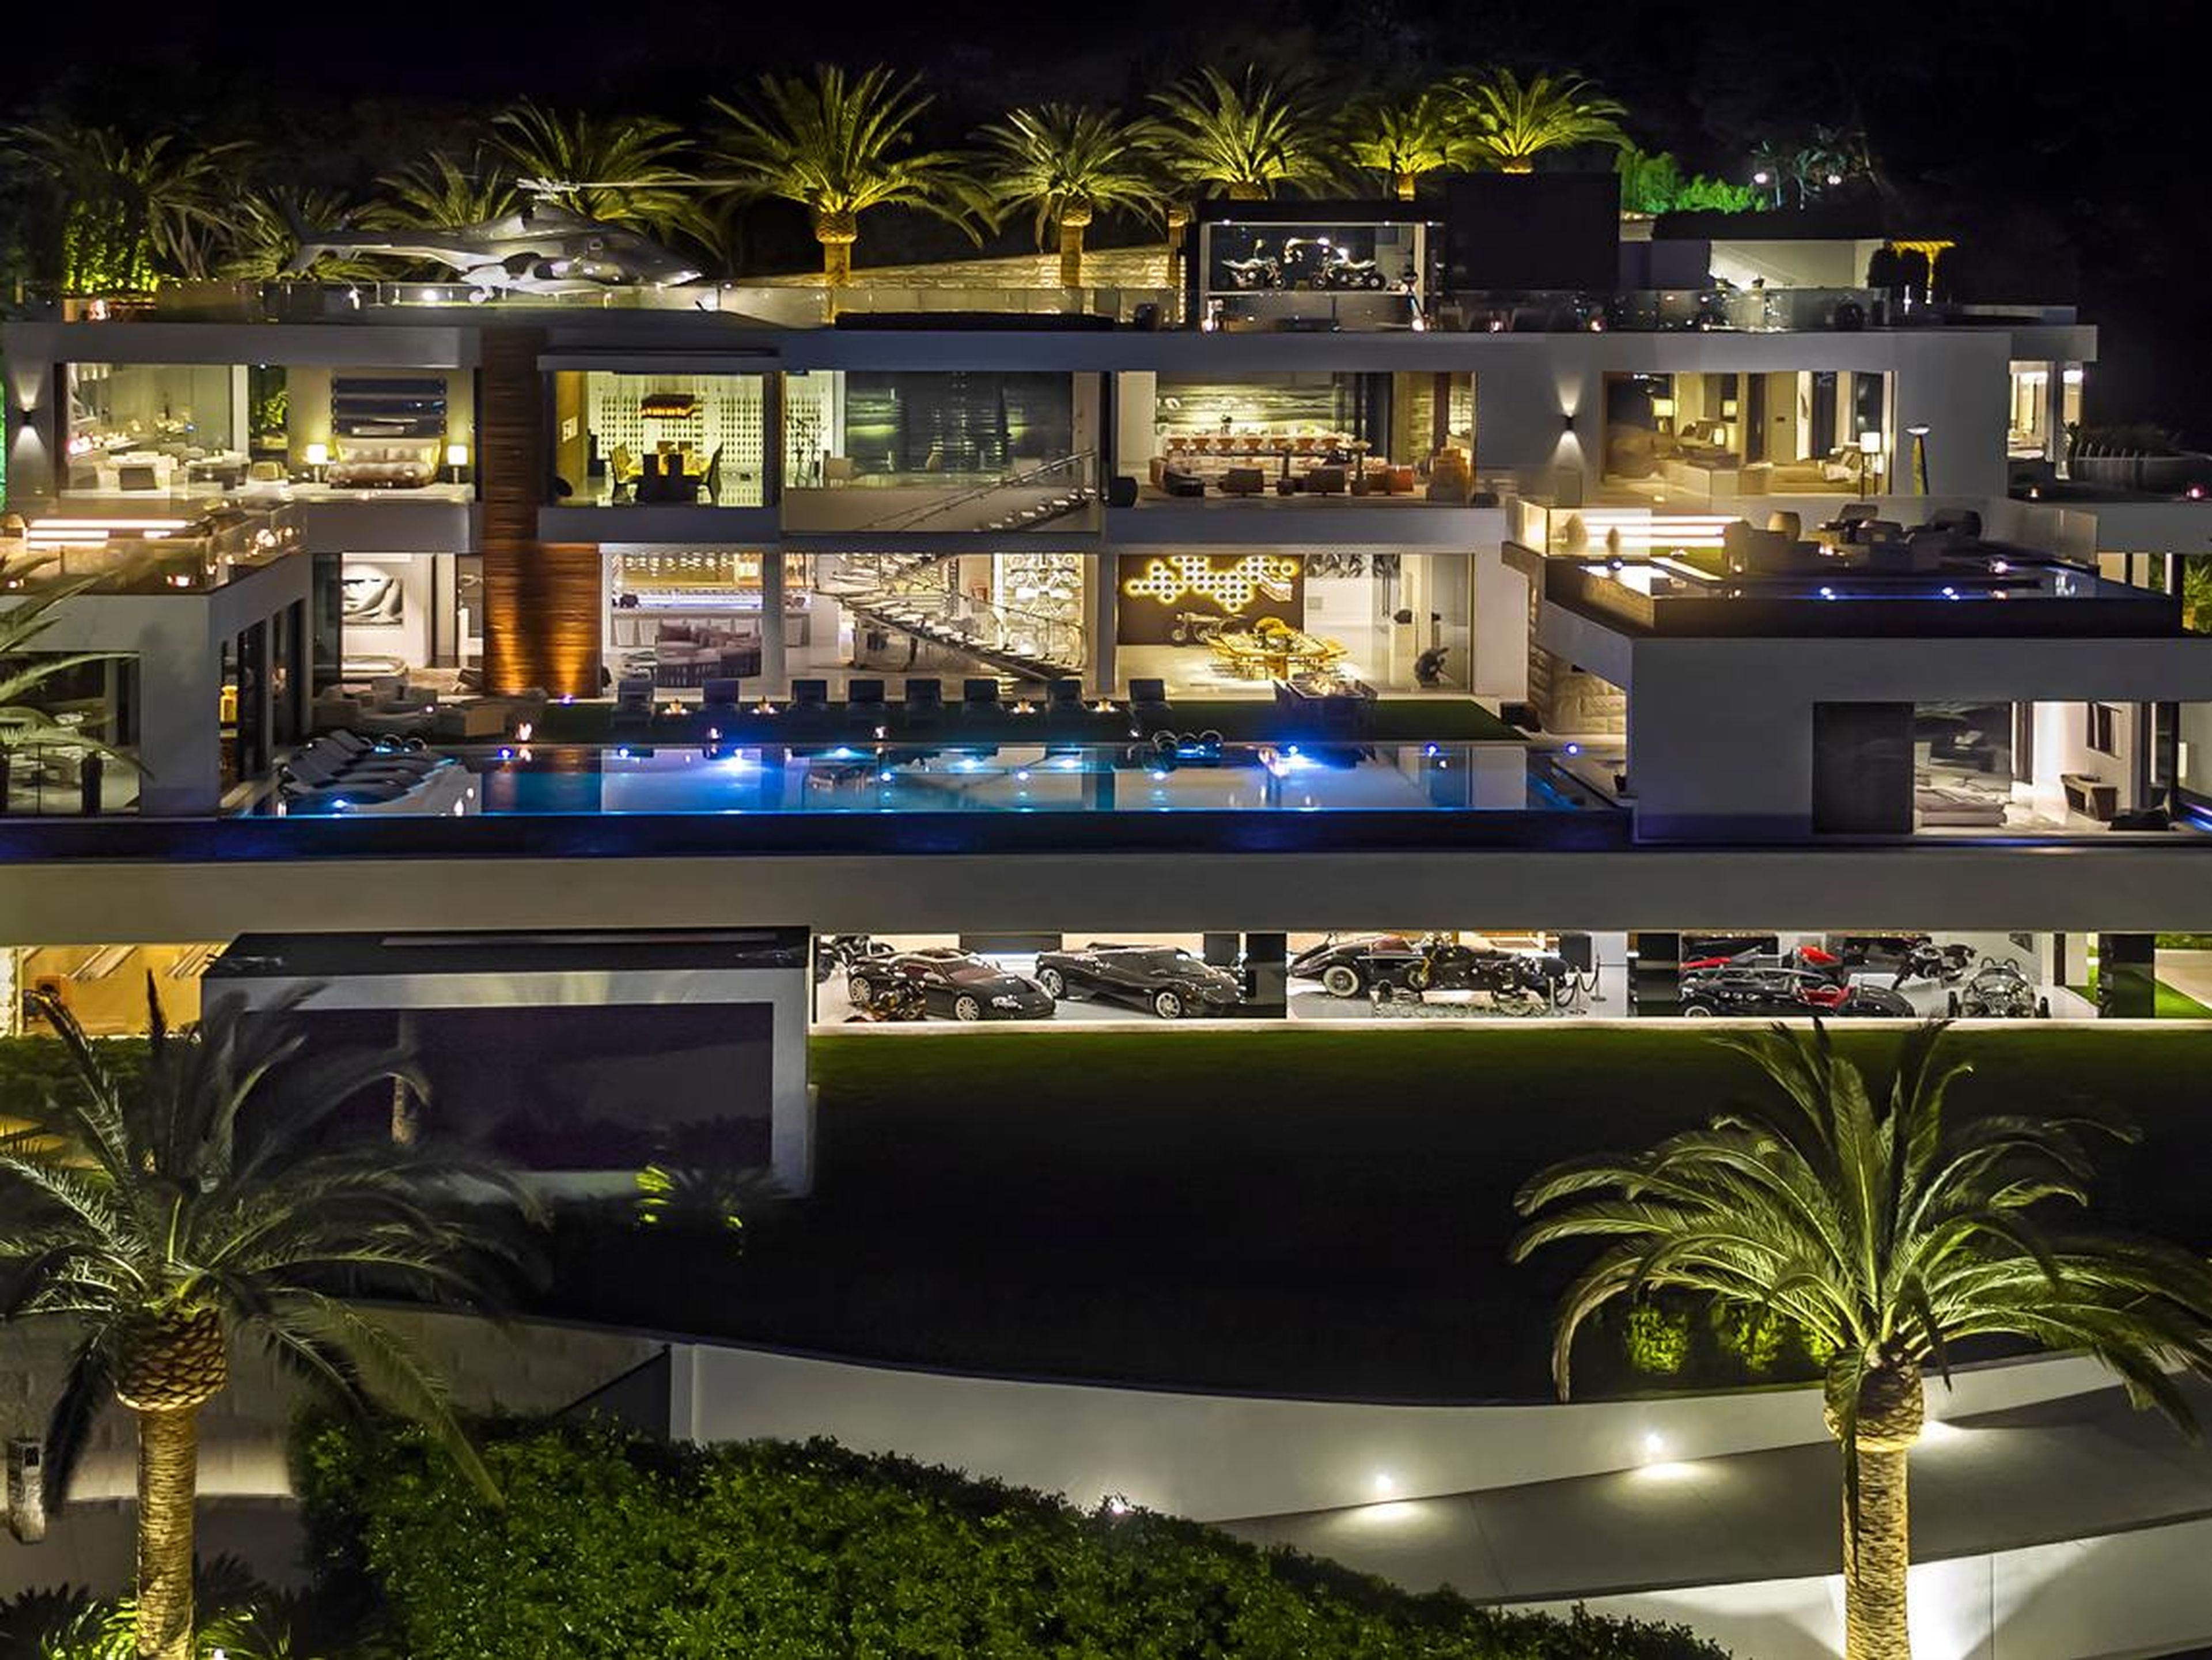 The perfect home for anyone with $188 million to spare.